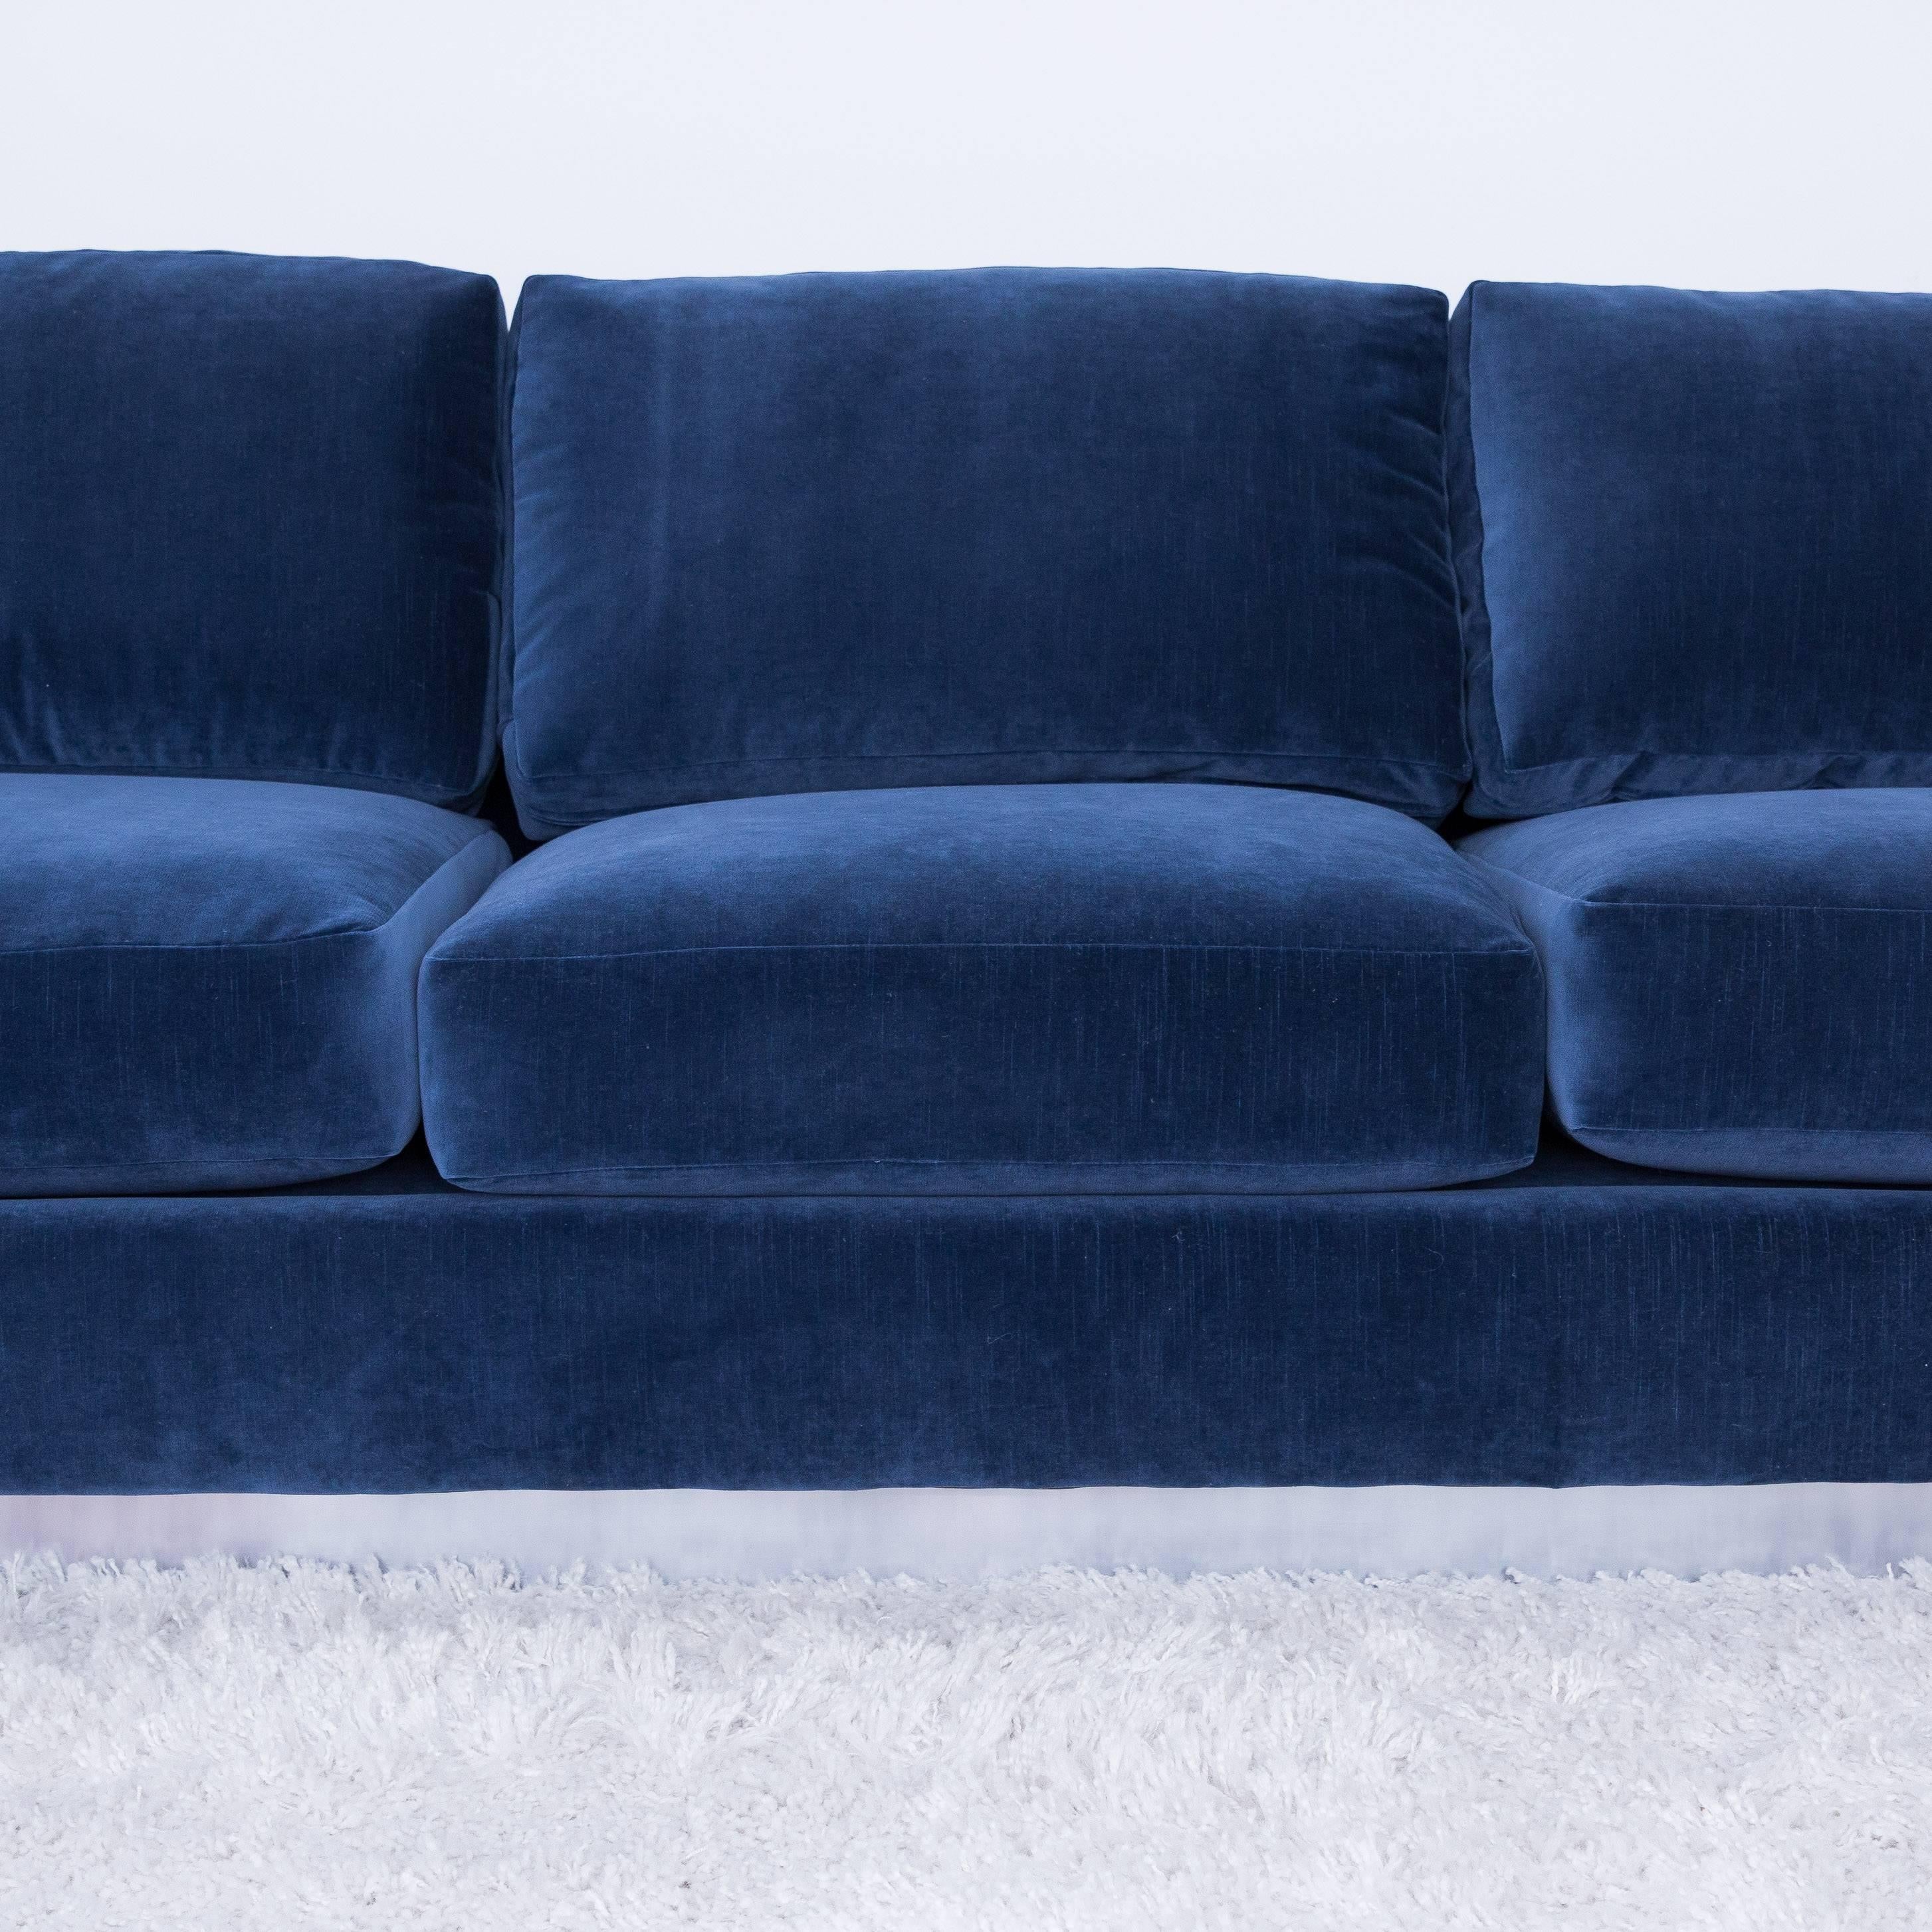 Designed by Cy Mann exclusively for his Manhattan design store in the 1970s this 7' sleek low sofa sits on a brushed aluminum faced pedestal. It's been newly reupholstered in grey blue velvet fabric.